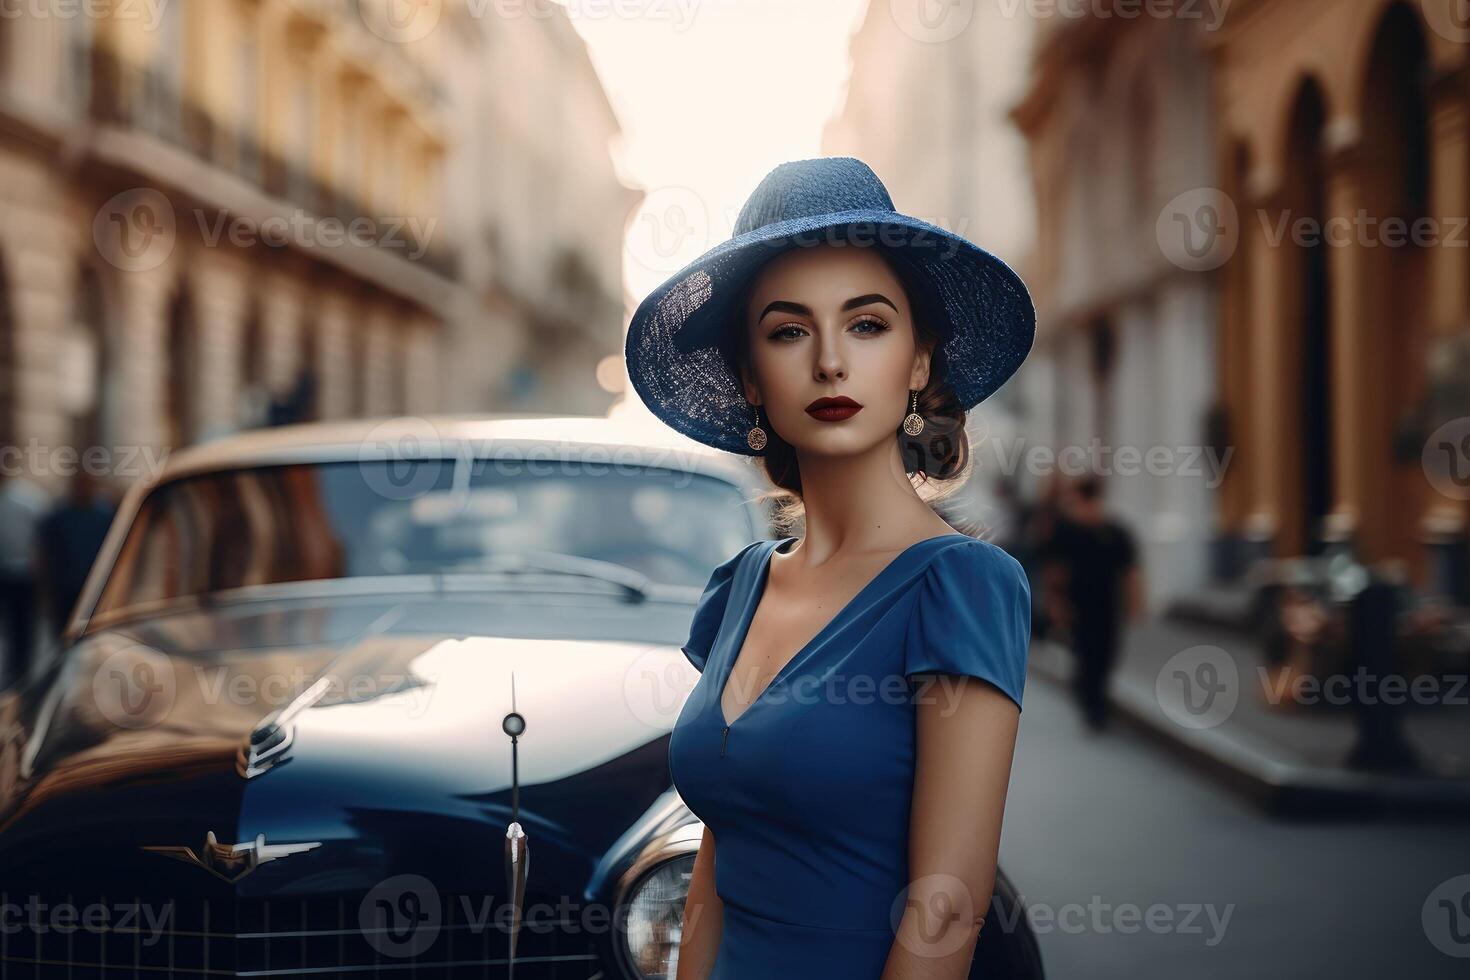 Photo of a woman wearing a blue dress and a hat, with a city street and a vintage car in the background.